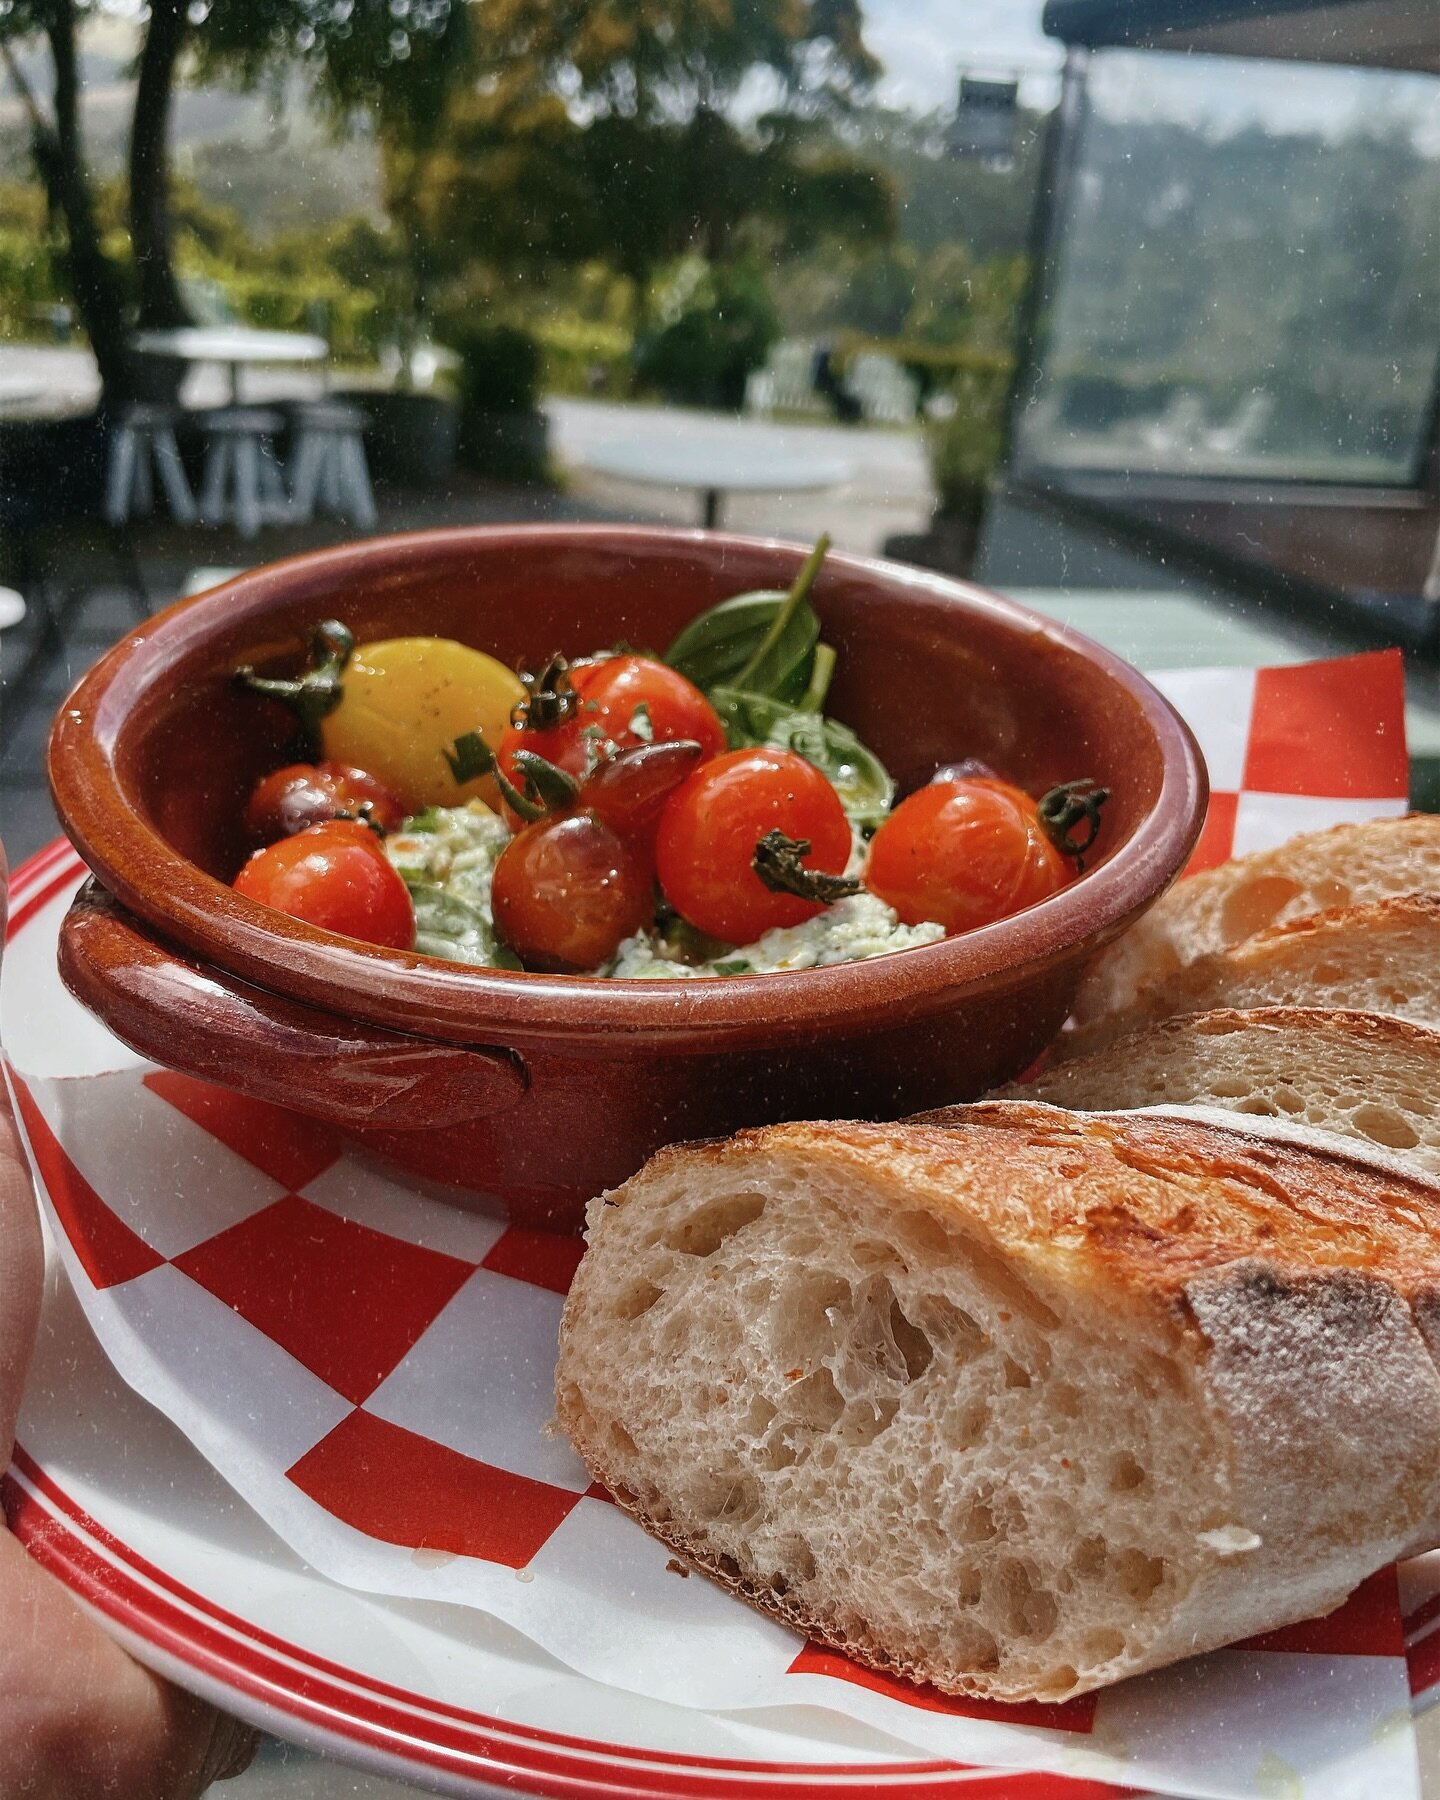 A weekend favourite: slow roasted garden tomatoes served on a bed of herbed ricotta and a side of sourdough. 

On our menu till the garden runs out of tomatoes. 🫶